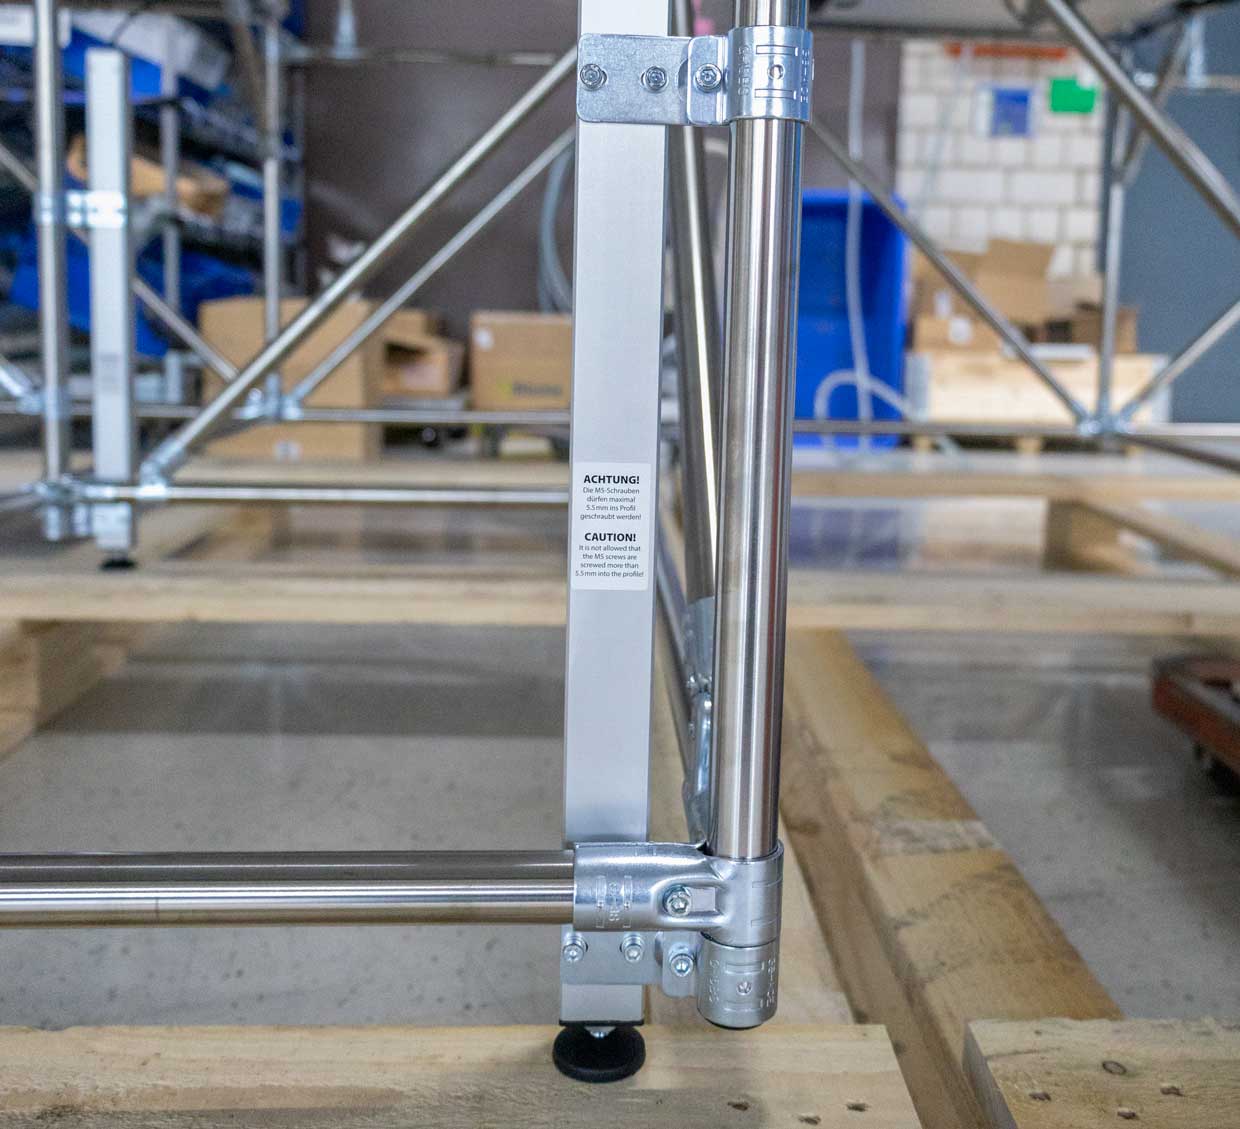 A hydraulic lifting system mounted on a workstation enables height adjustment.